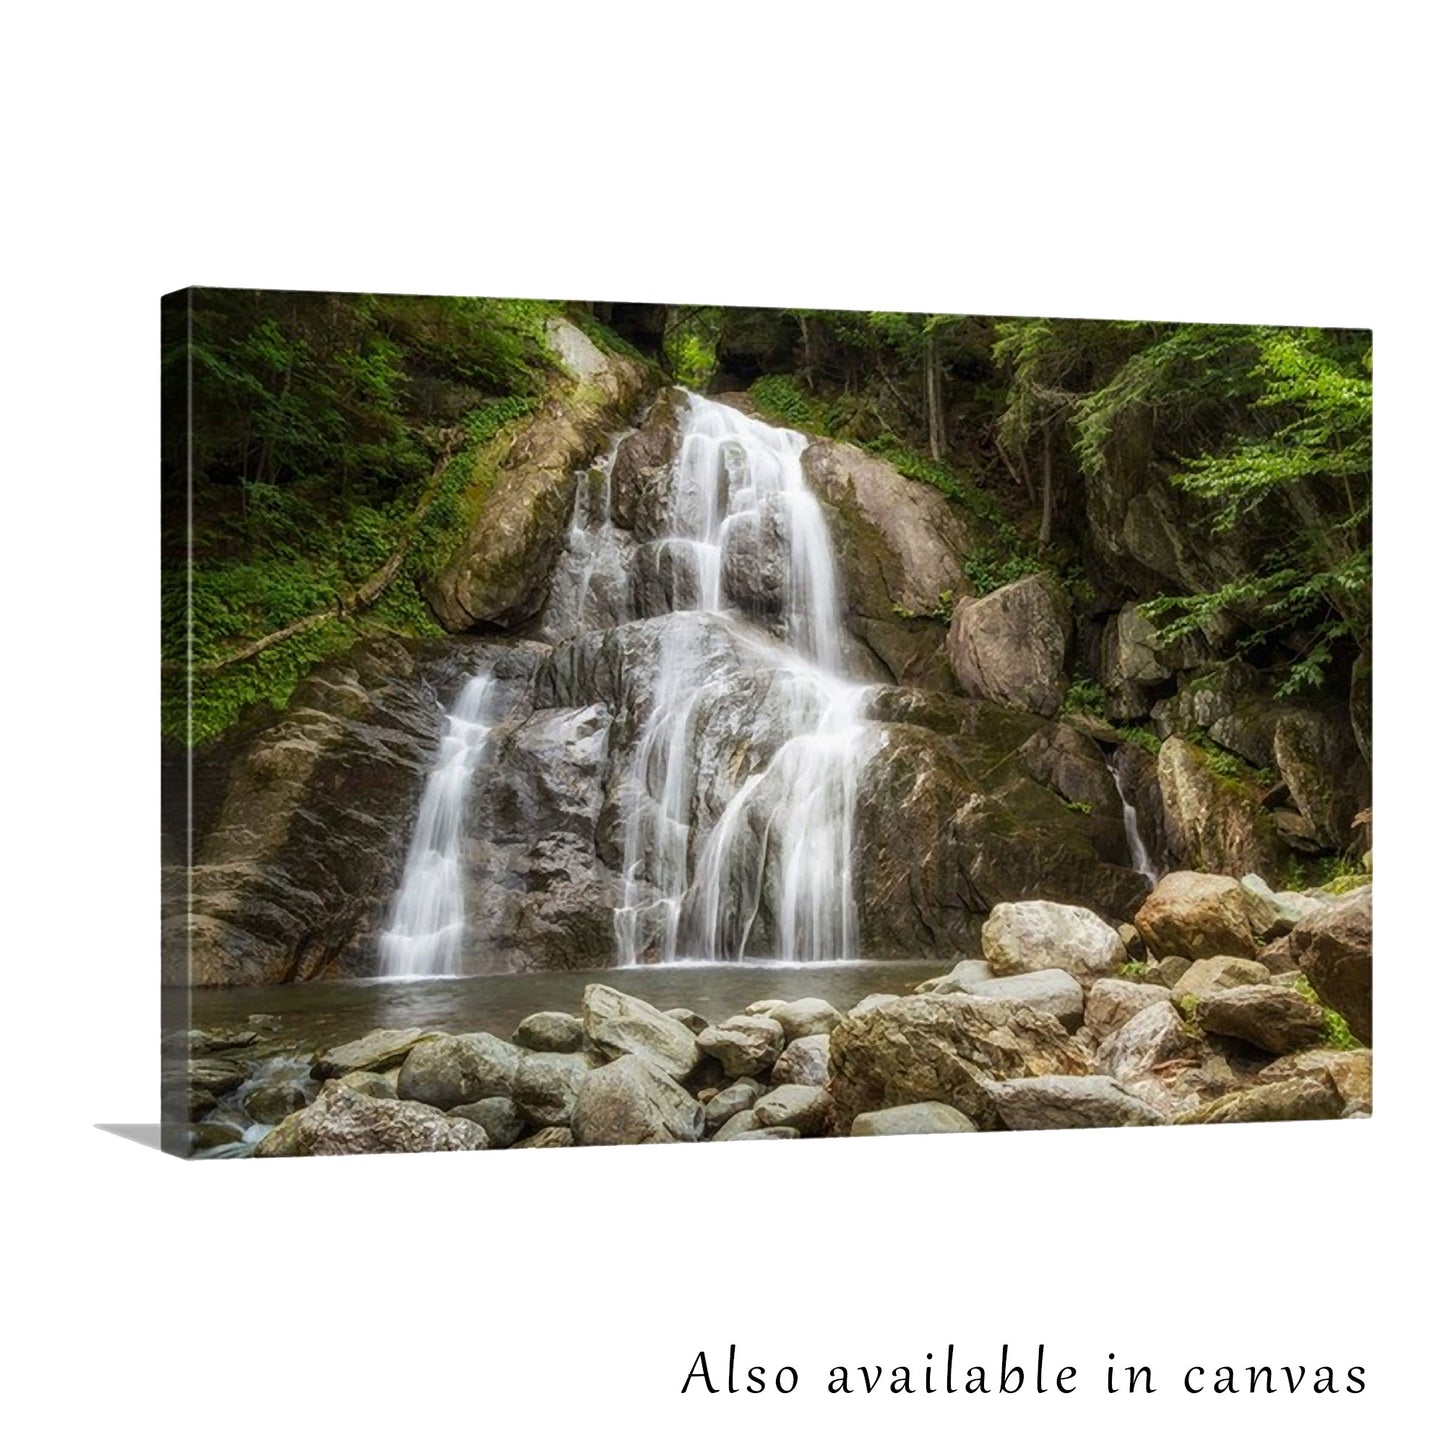 The photograph is beautifully presented on a gallery-wrapped canvas, showing this waterfall photograph is also available as a canvas print for those interested in a ready-to-hang solution.